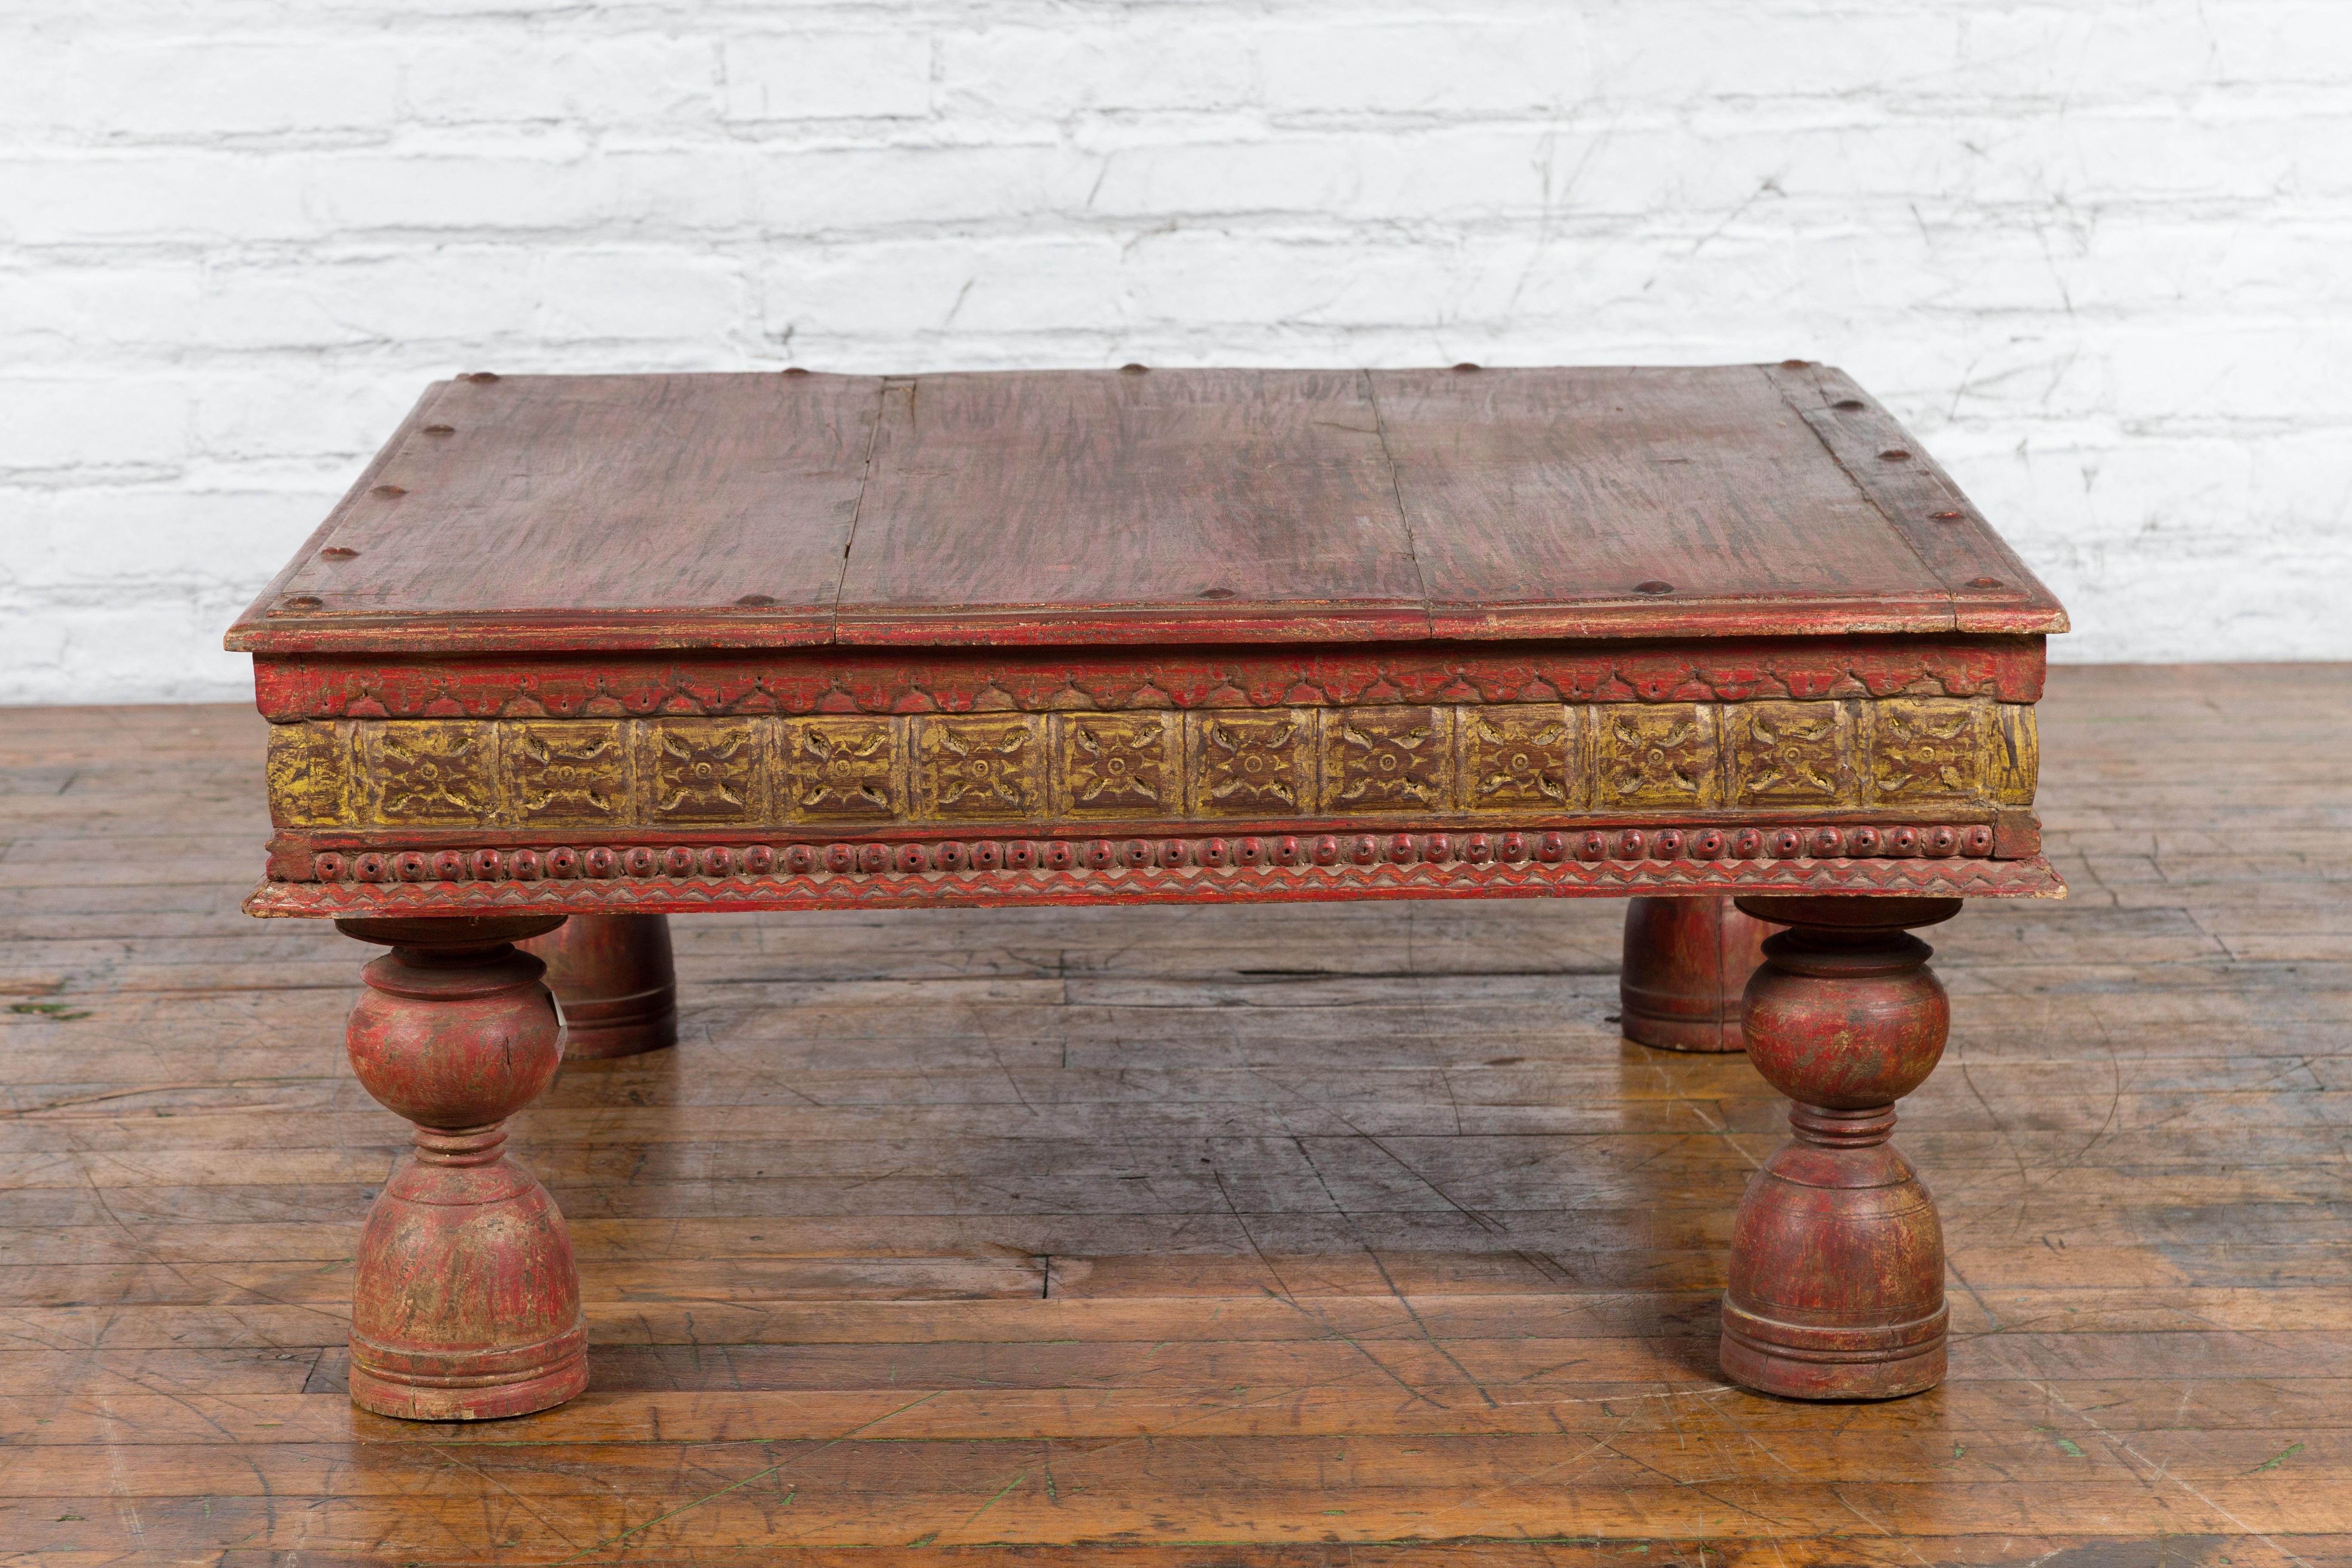 Indian Primitive Low Carved Wooden Coffee Table with Polychrome Accents For Sale 6